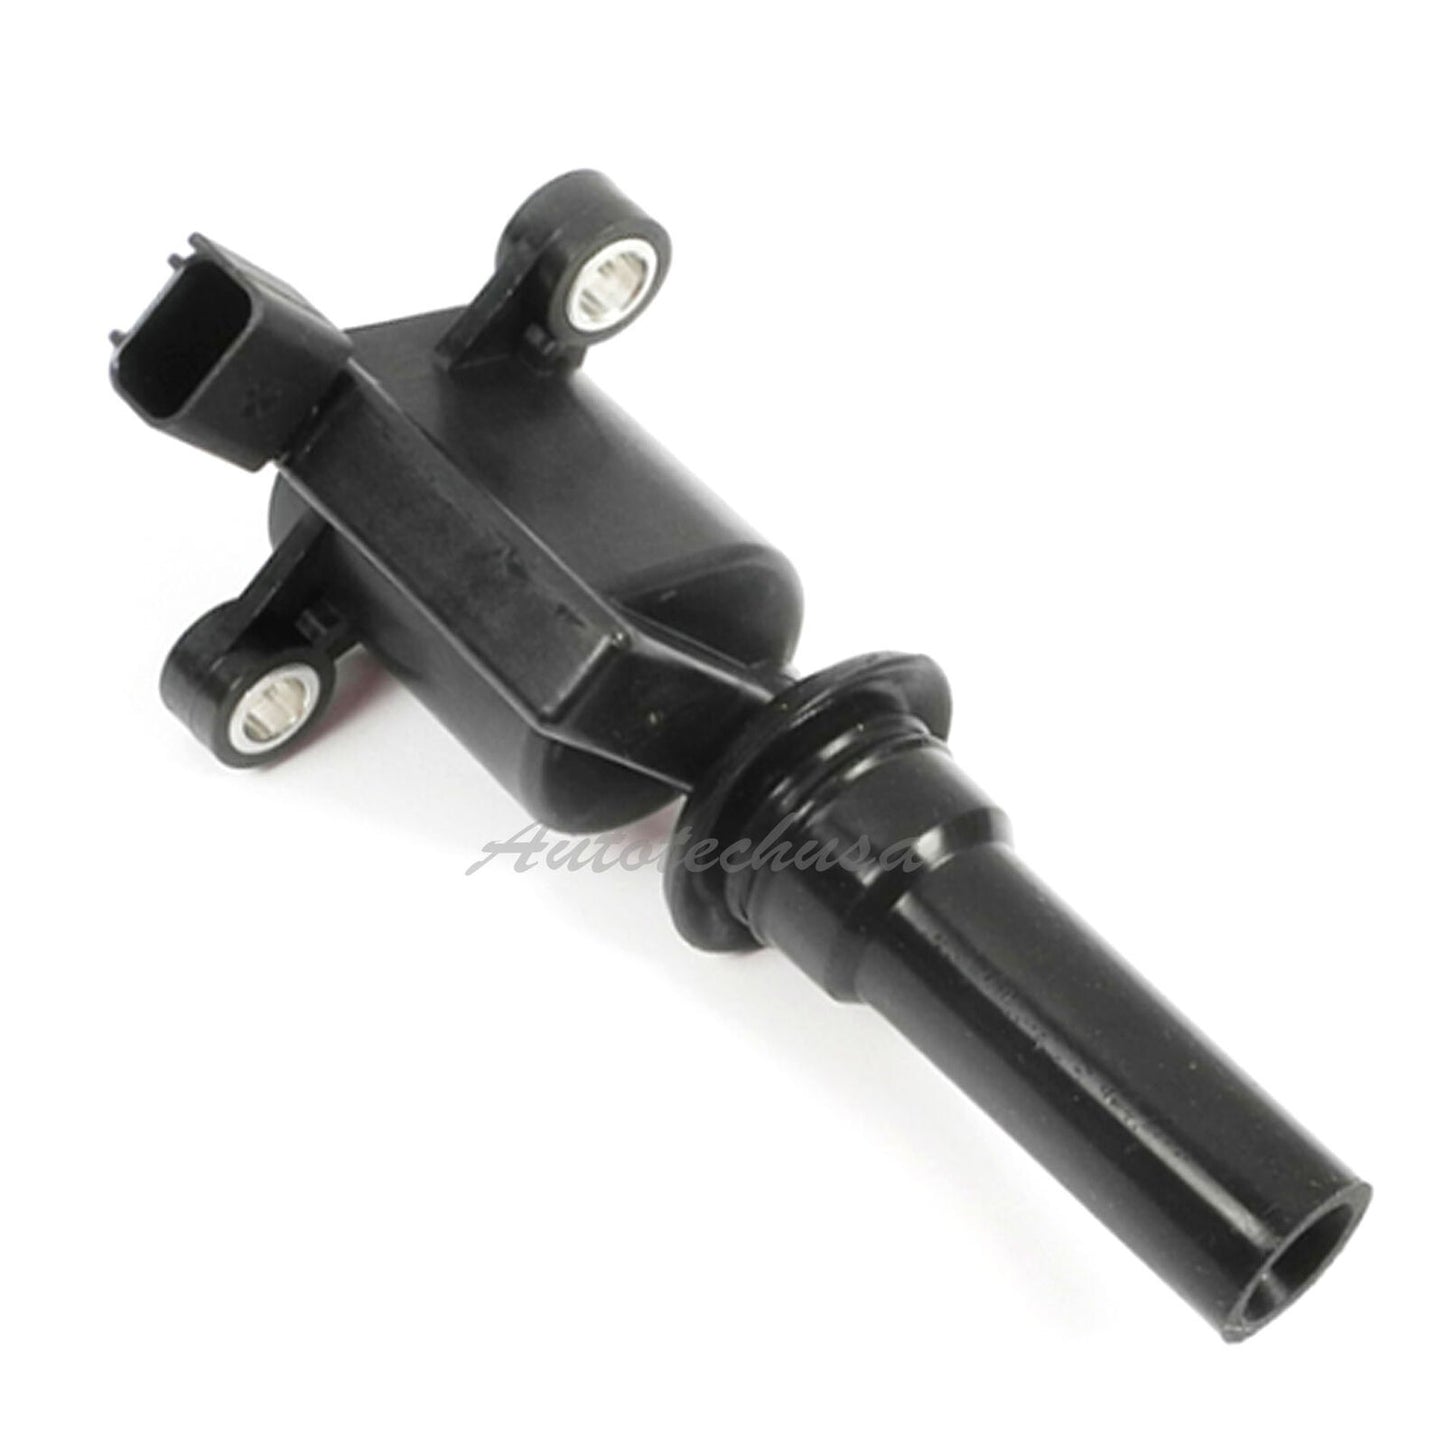 UF-162 DG-465 5C1126 Ignition Coil For 1996 1997 1998 1999 Ford Taurus 3.4L